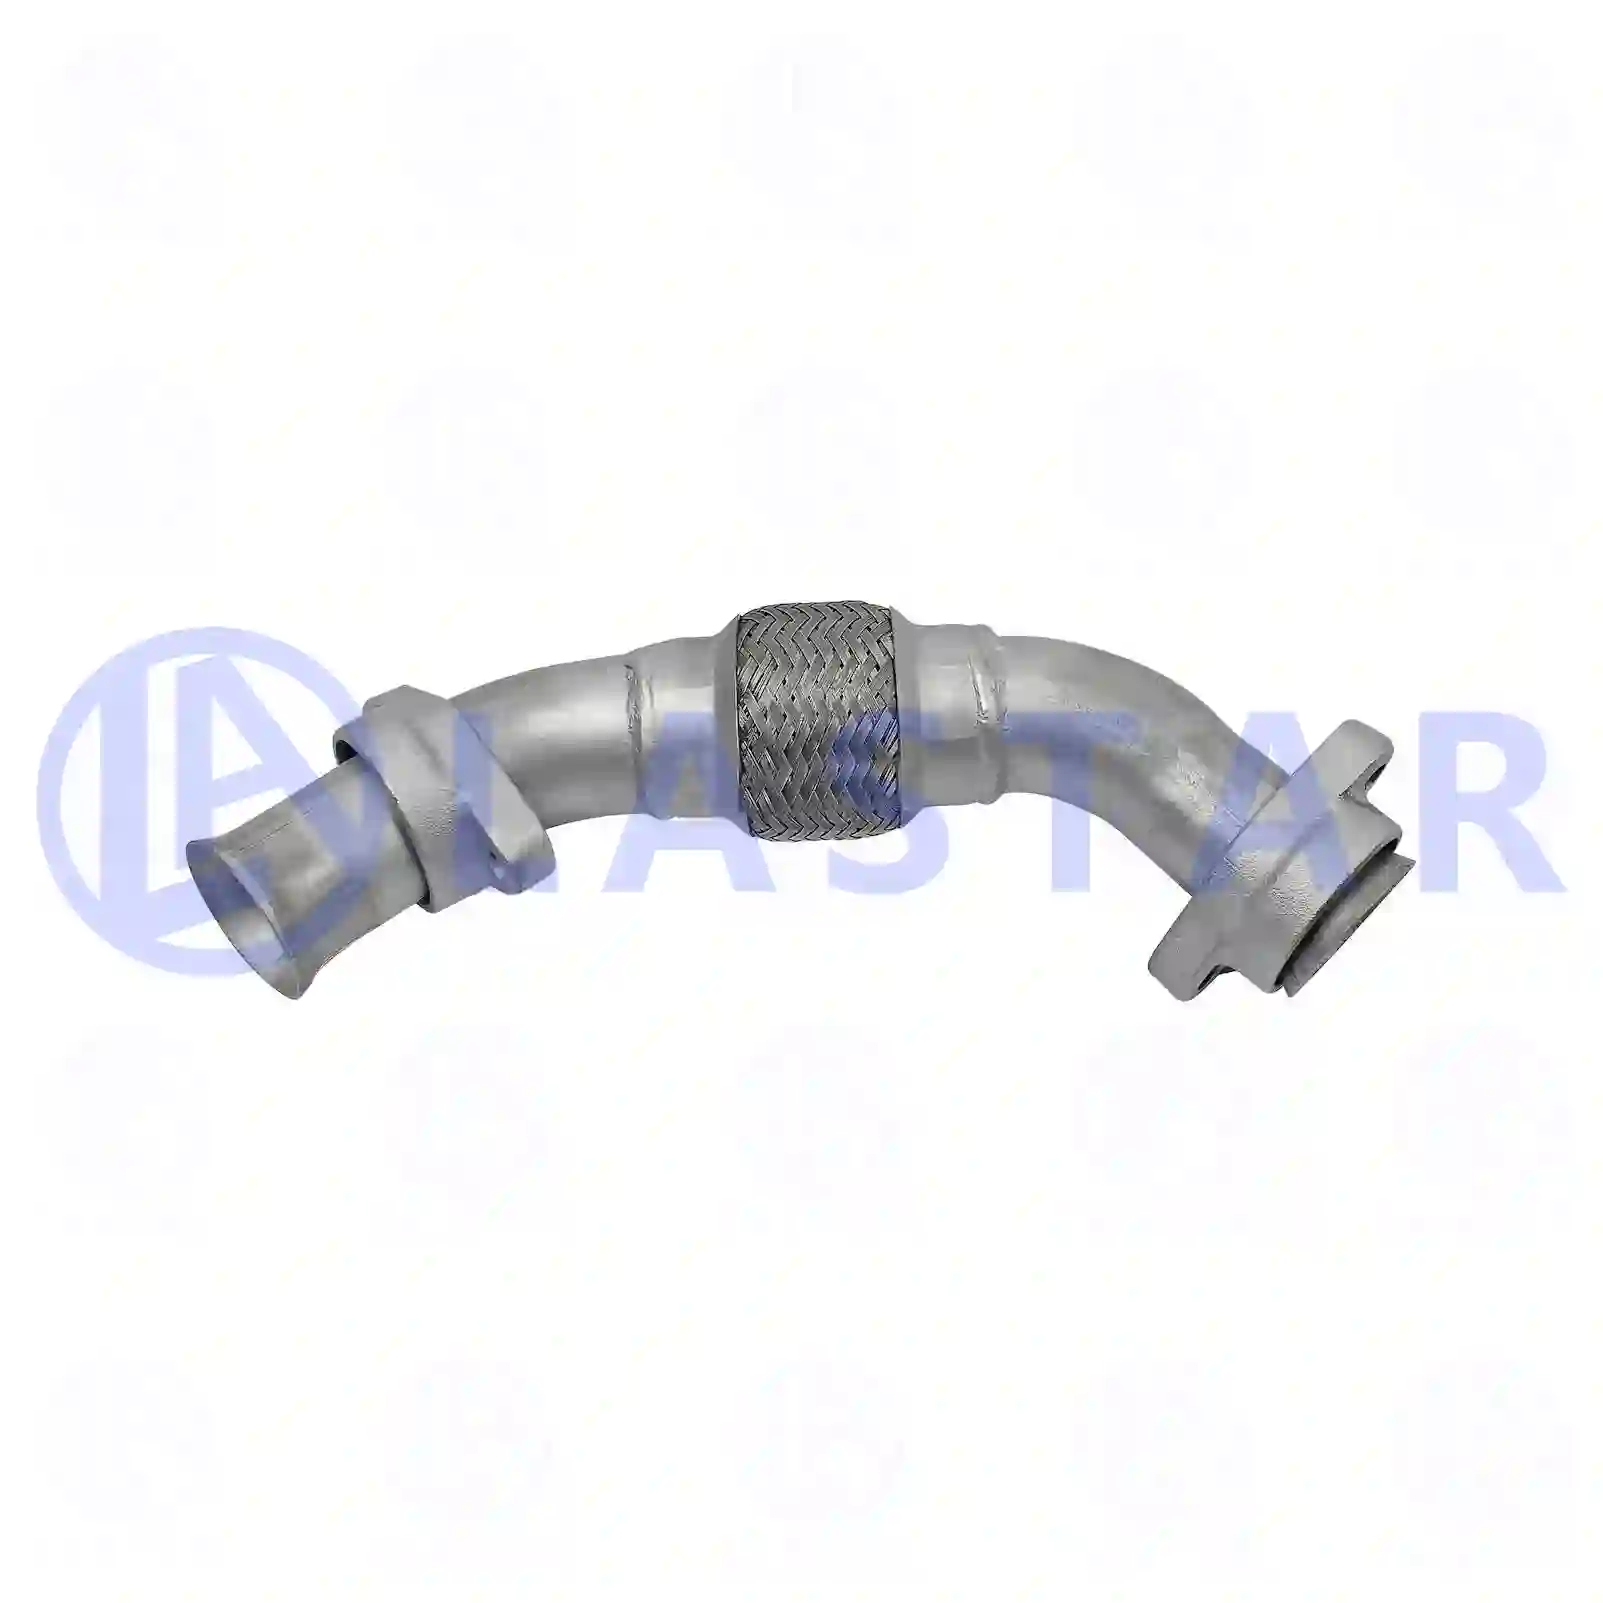 Exhaust manifold, 77702010, 5411401903, 5411402503, 5411402903 ||  77702010 Lastar Spare Part | Truck Spare Parts, Auotomotive Spare Parts Exhaust manifold, 77702010, 5411401903, 5411402503, 5411402903 ||  77702010 Lastar Spare Part | Truck Spare Parts, Auotomotive Spare Parts